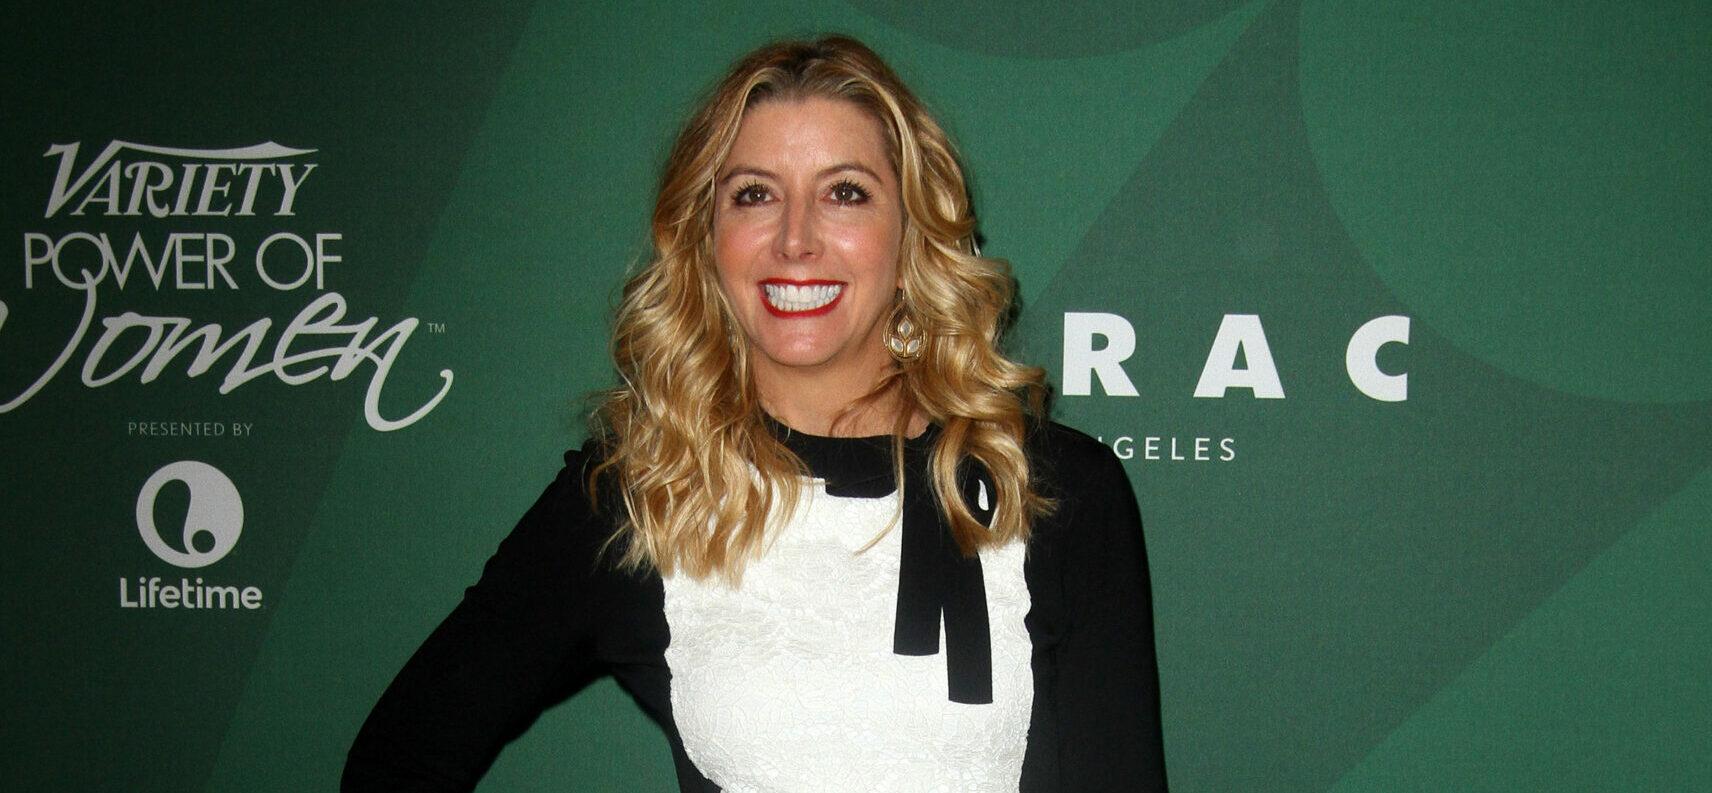 Spanx CEO Sara Blakely gives employees 2 plane tickets and $10,000